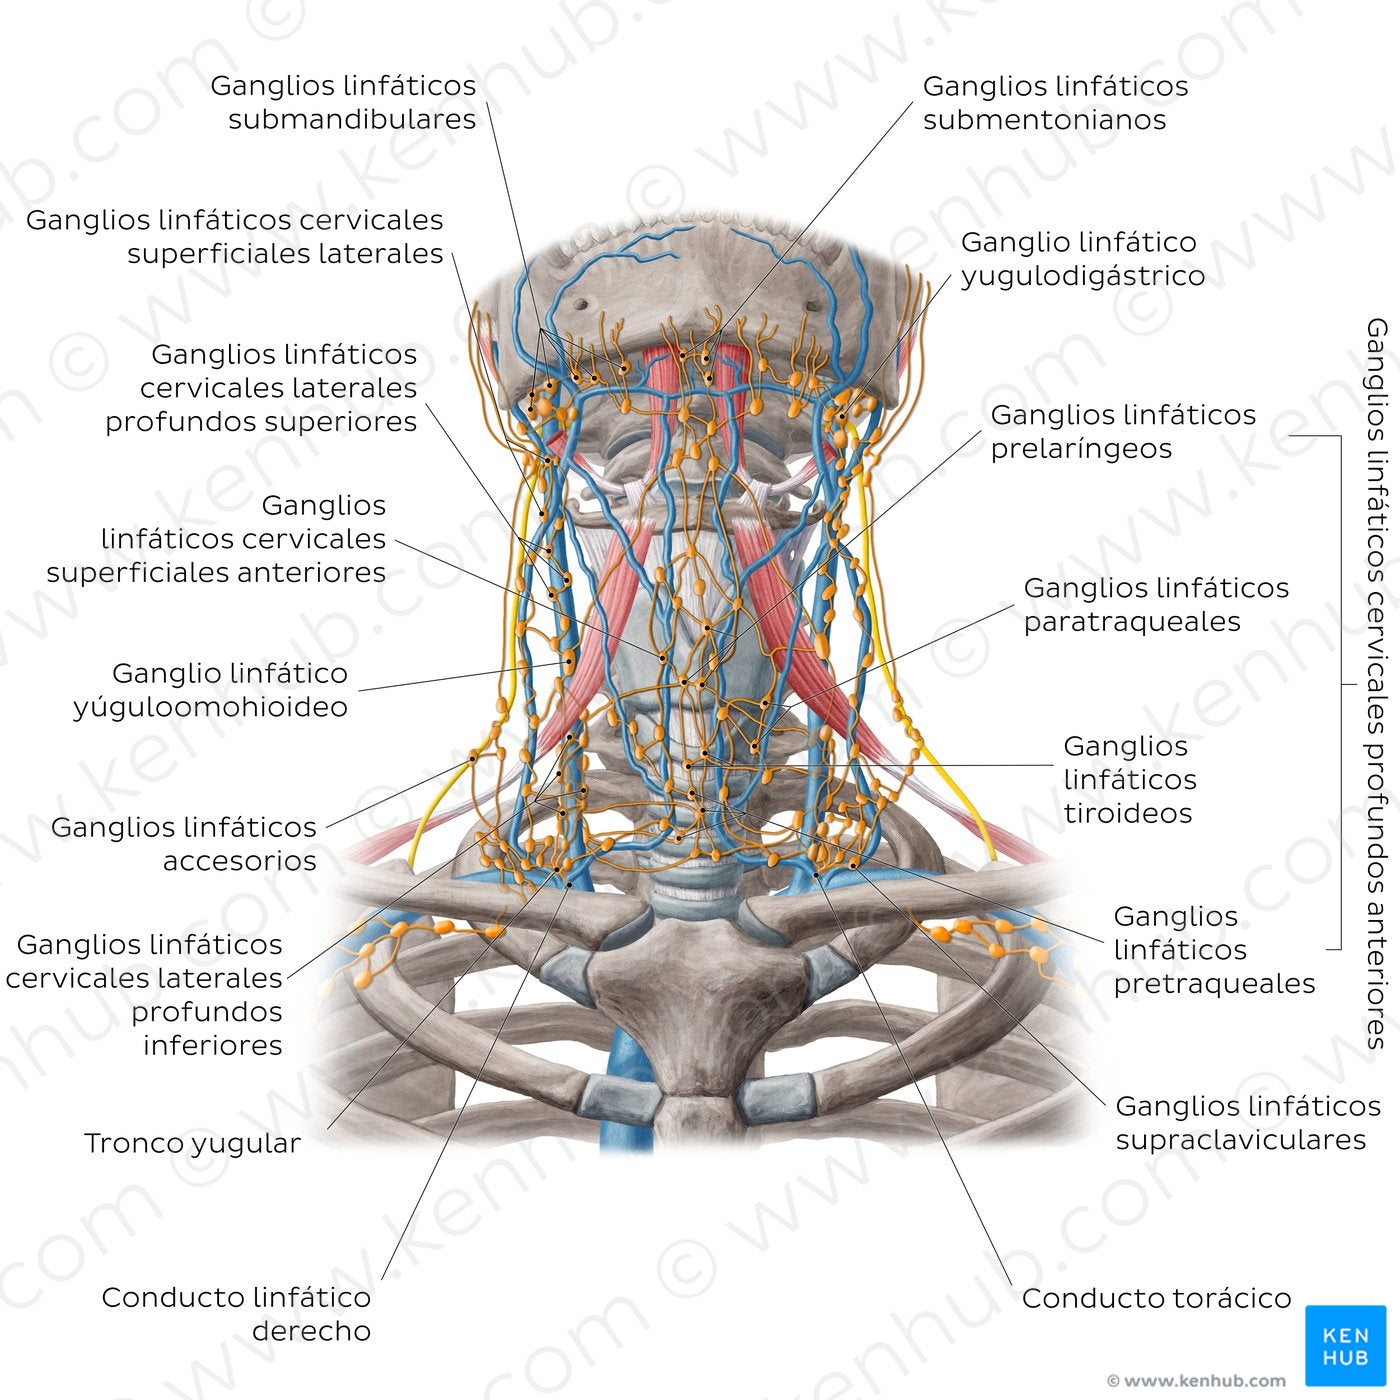 Lymphatics of the head and neck (Anterior) (Spanish)